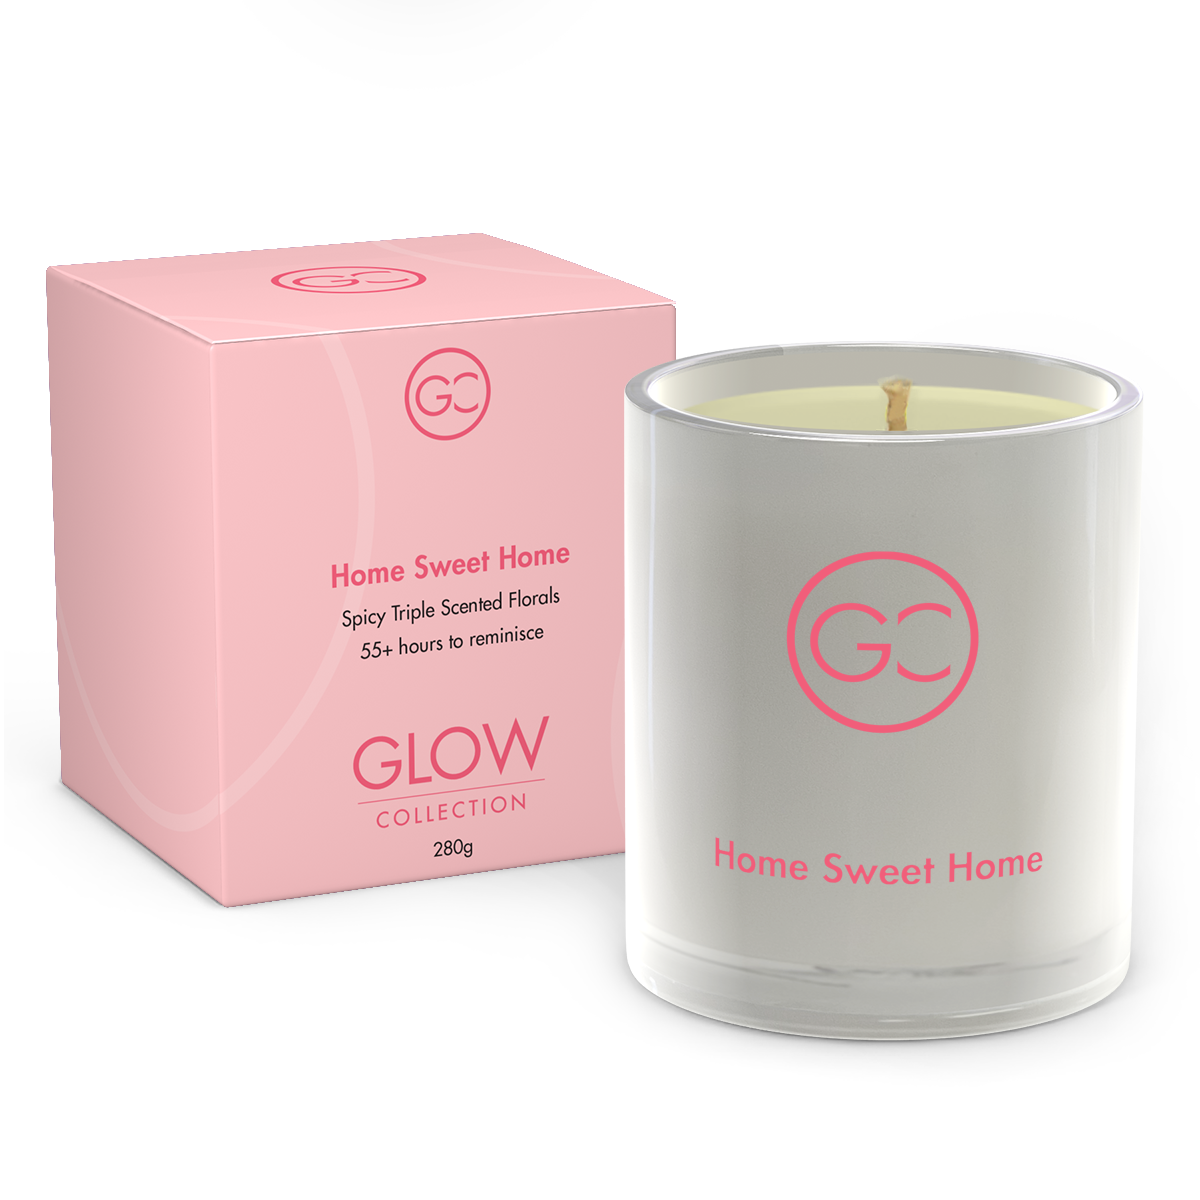 Home Sweet Home - Gardenia Scented Soy Candle 55hr Burn